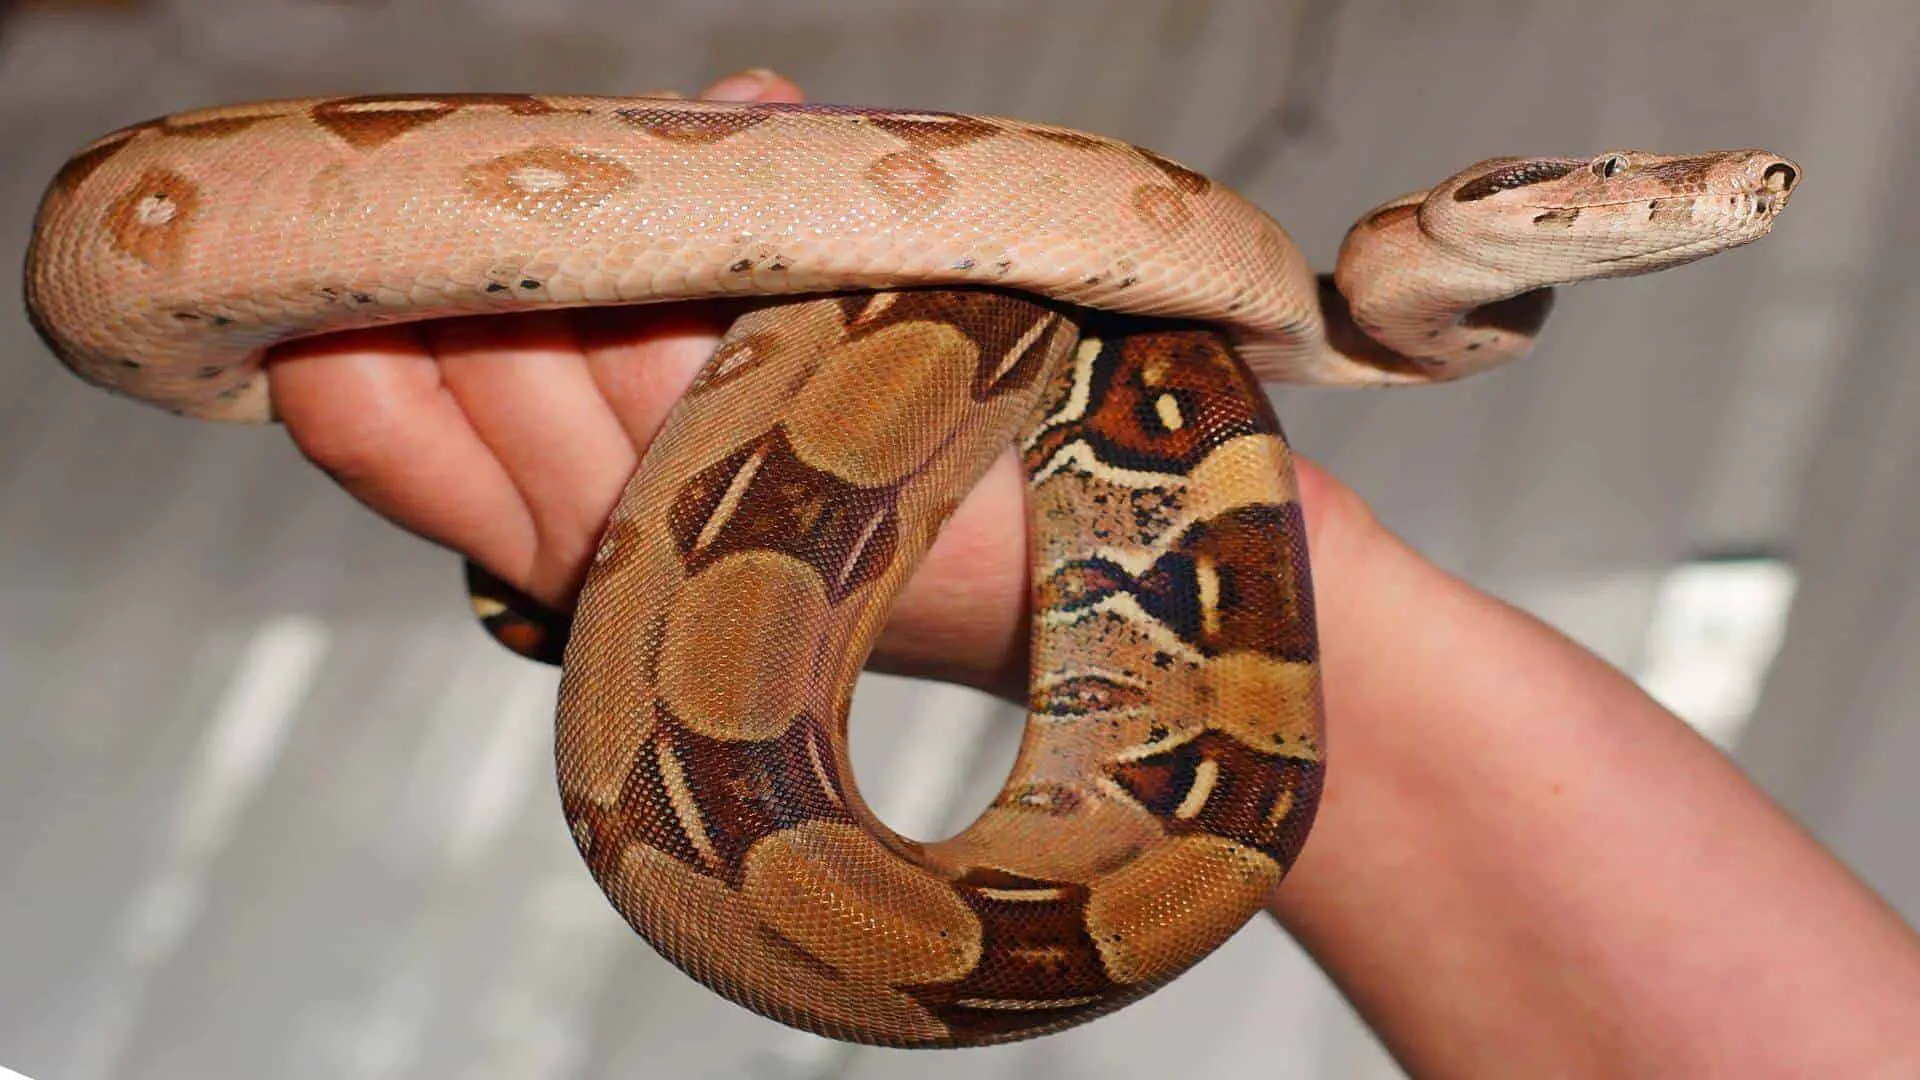 What Are The Most Common Pet Snakes Reptile Roommate,How To Make A Diaper Cake With Blankets